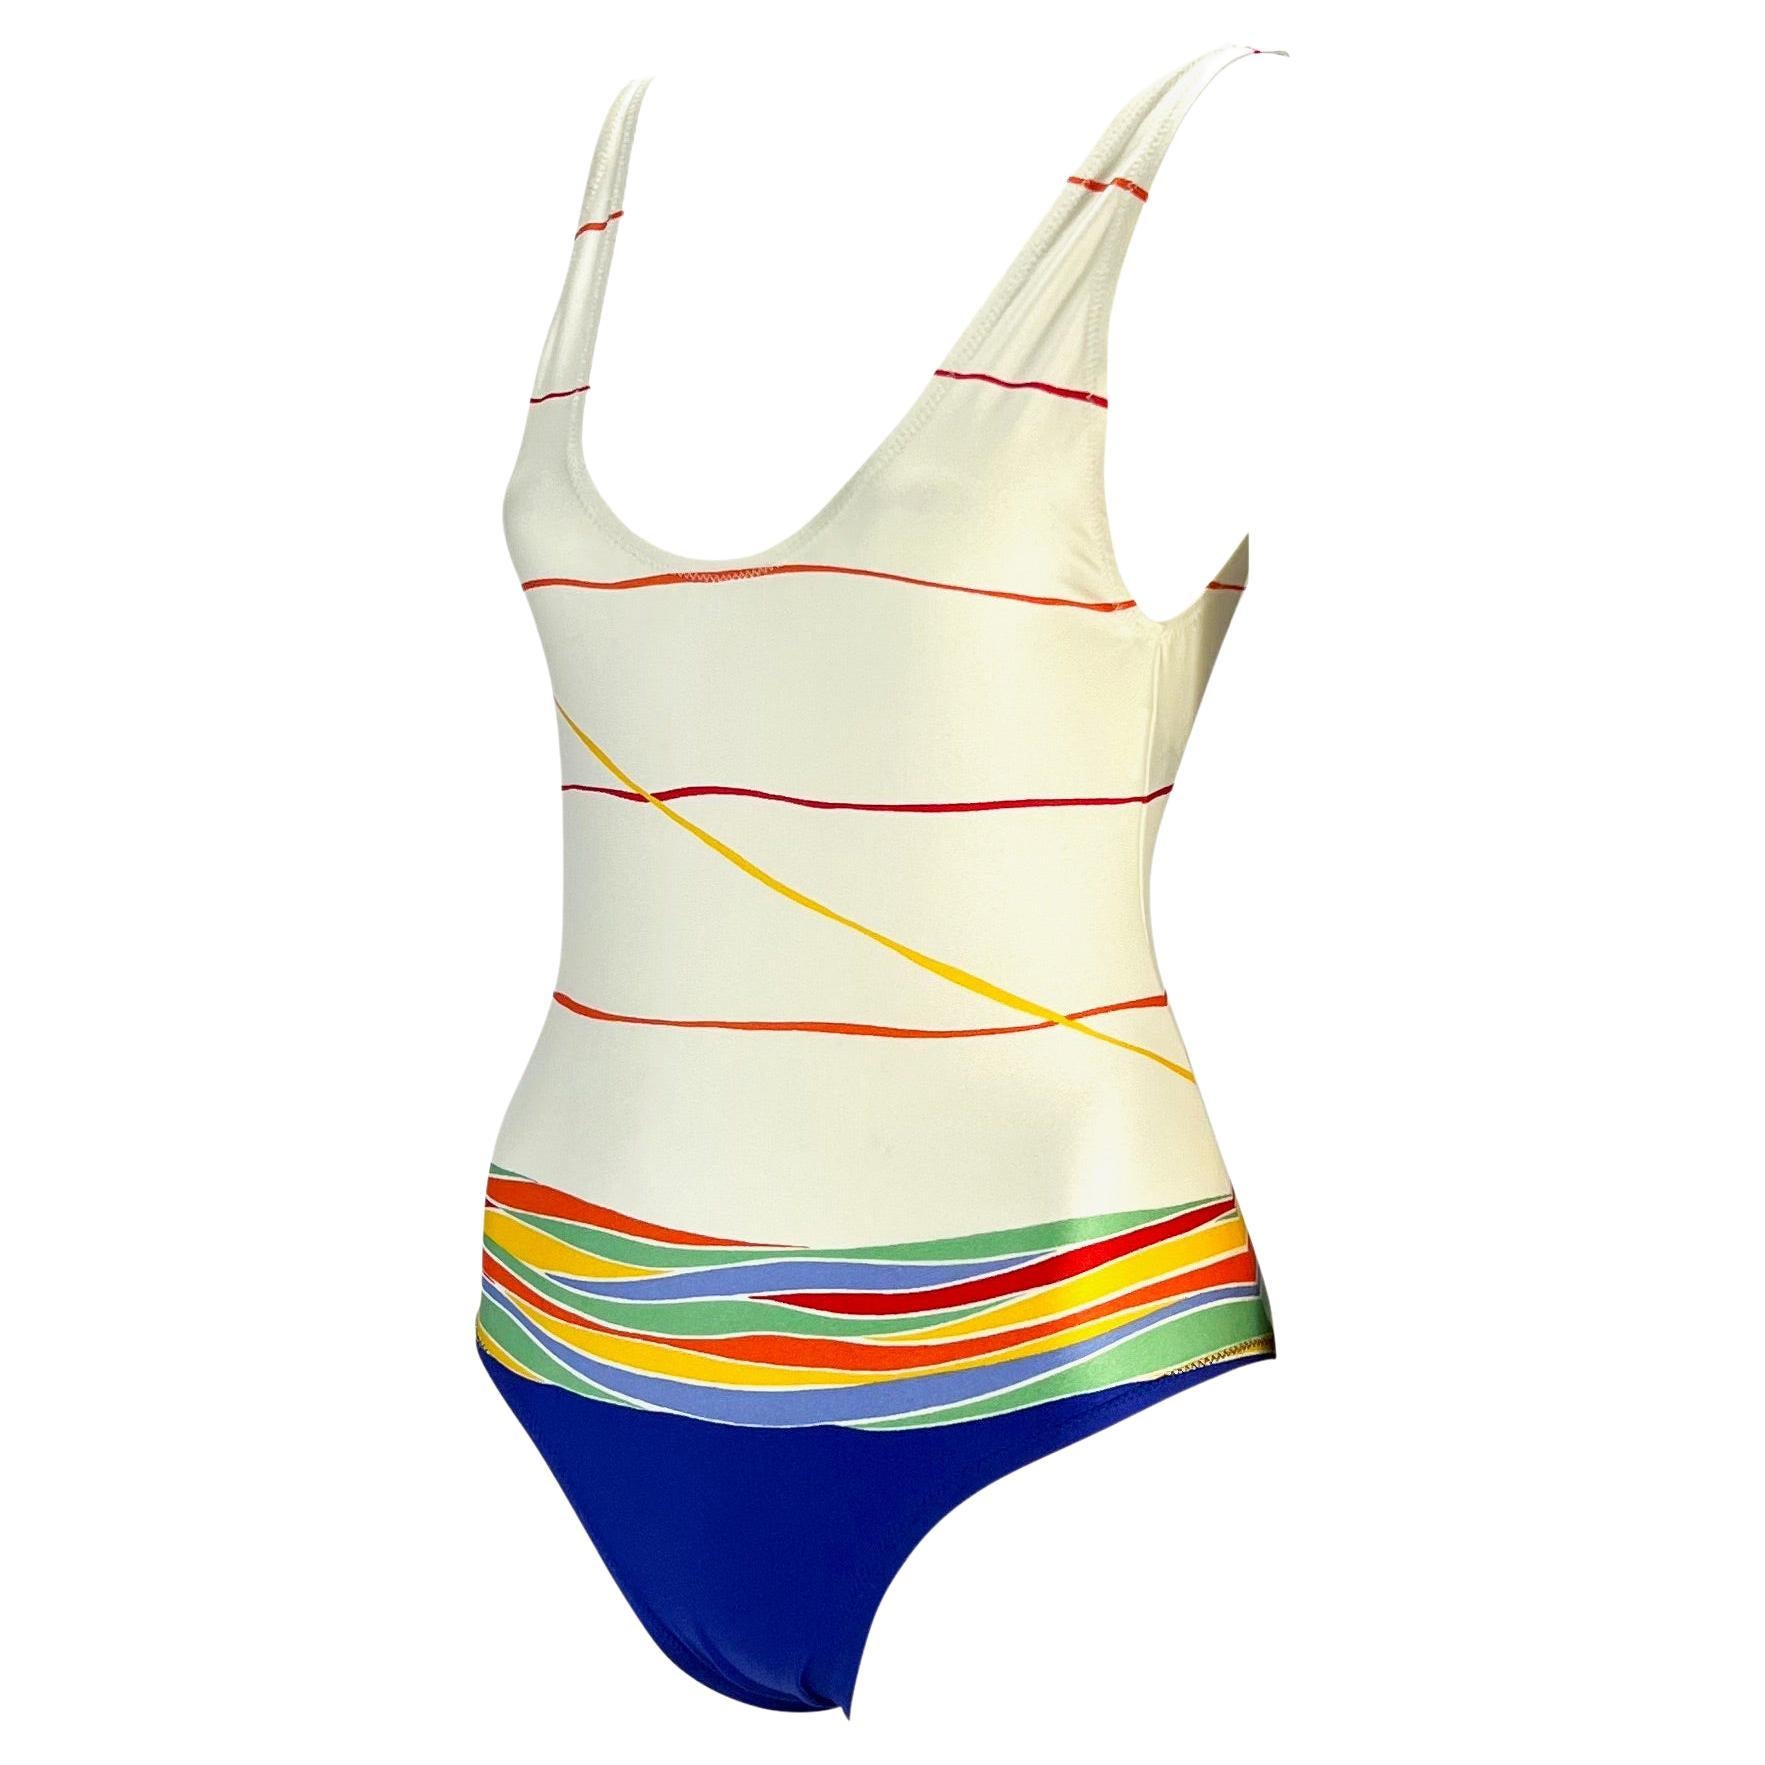 Presenting a gorgeous 1970s Gucci bathing suit with matching cover up shawl. The one piece bathing suit and pareo feature a colorful abstract print on off-white. In amazing condition, you would never guess this fabulous set is nearly 50 years old.